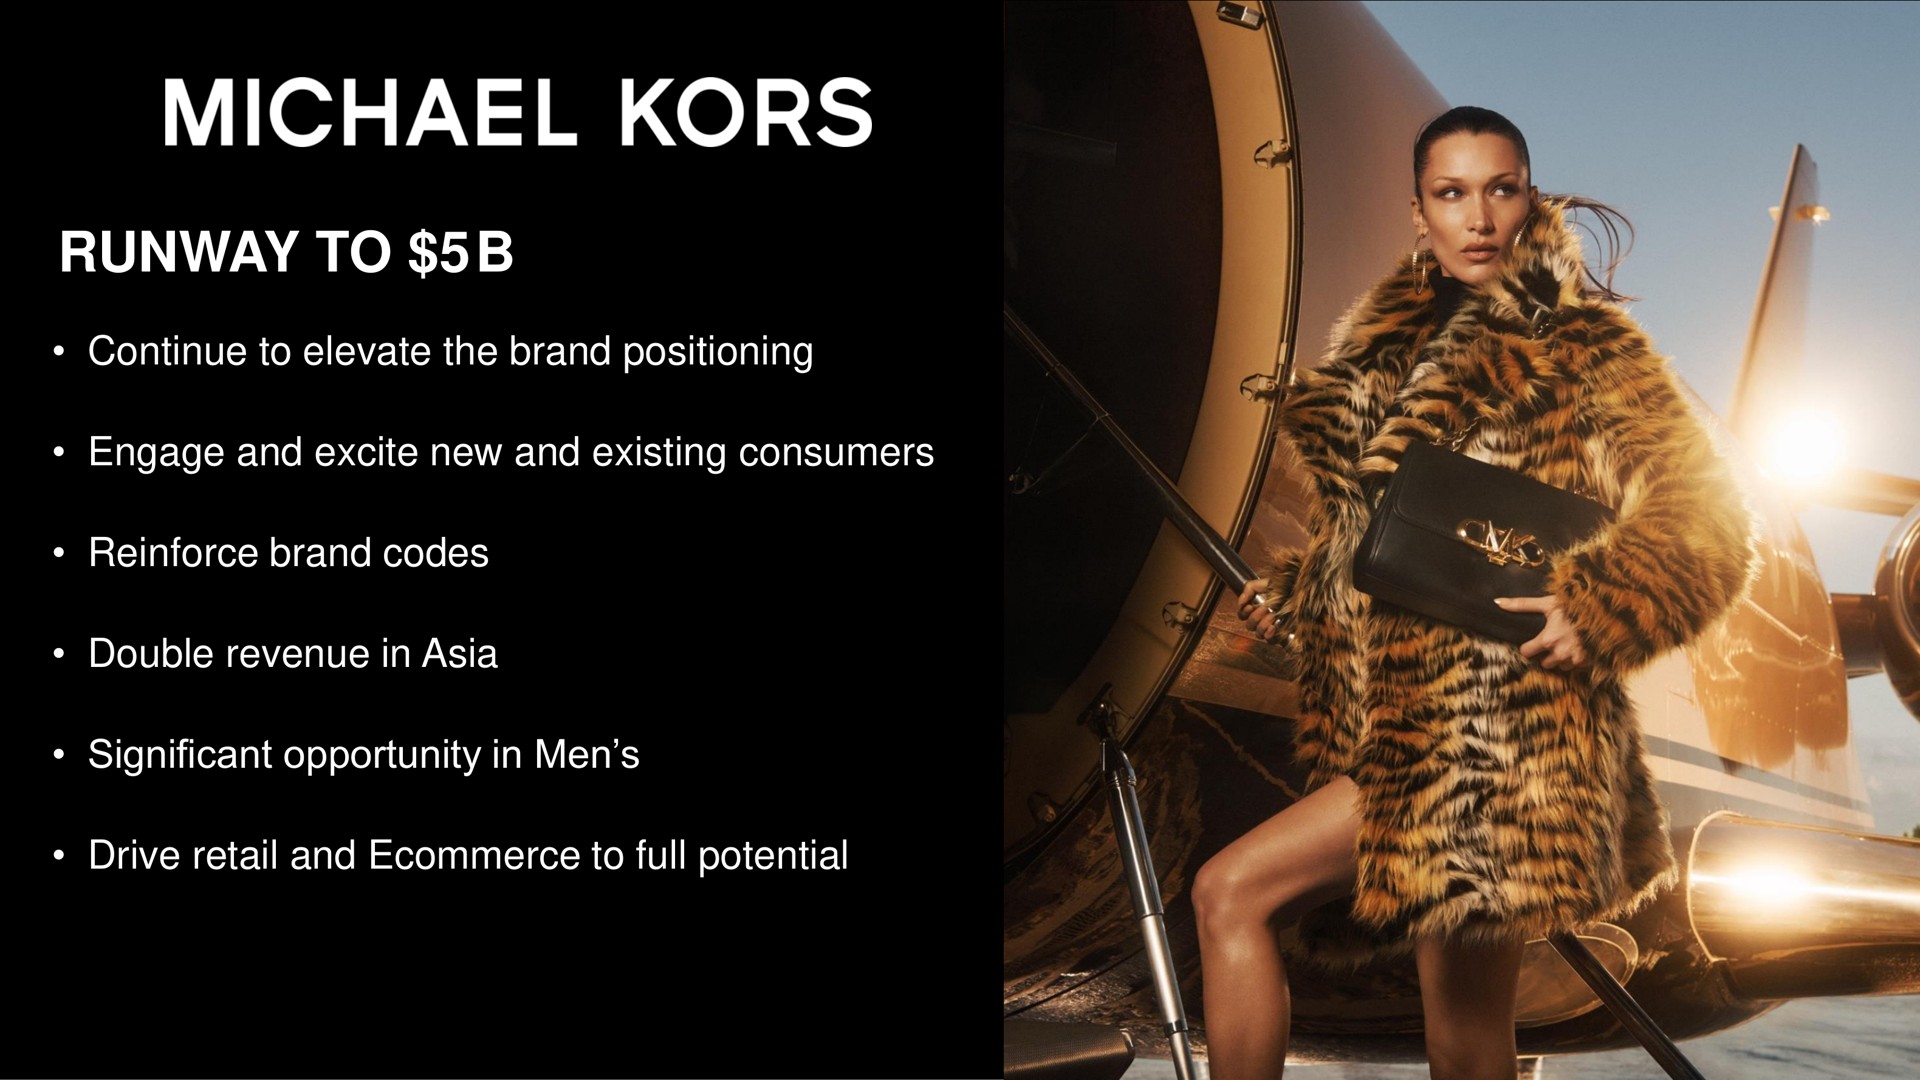 runway to continue to elevate the brand positioning engage and excite new and existing consumers reinforce brand codes double revenue in significant opportunity in men drive retail and to full potential kors | Capri Holdings